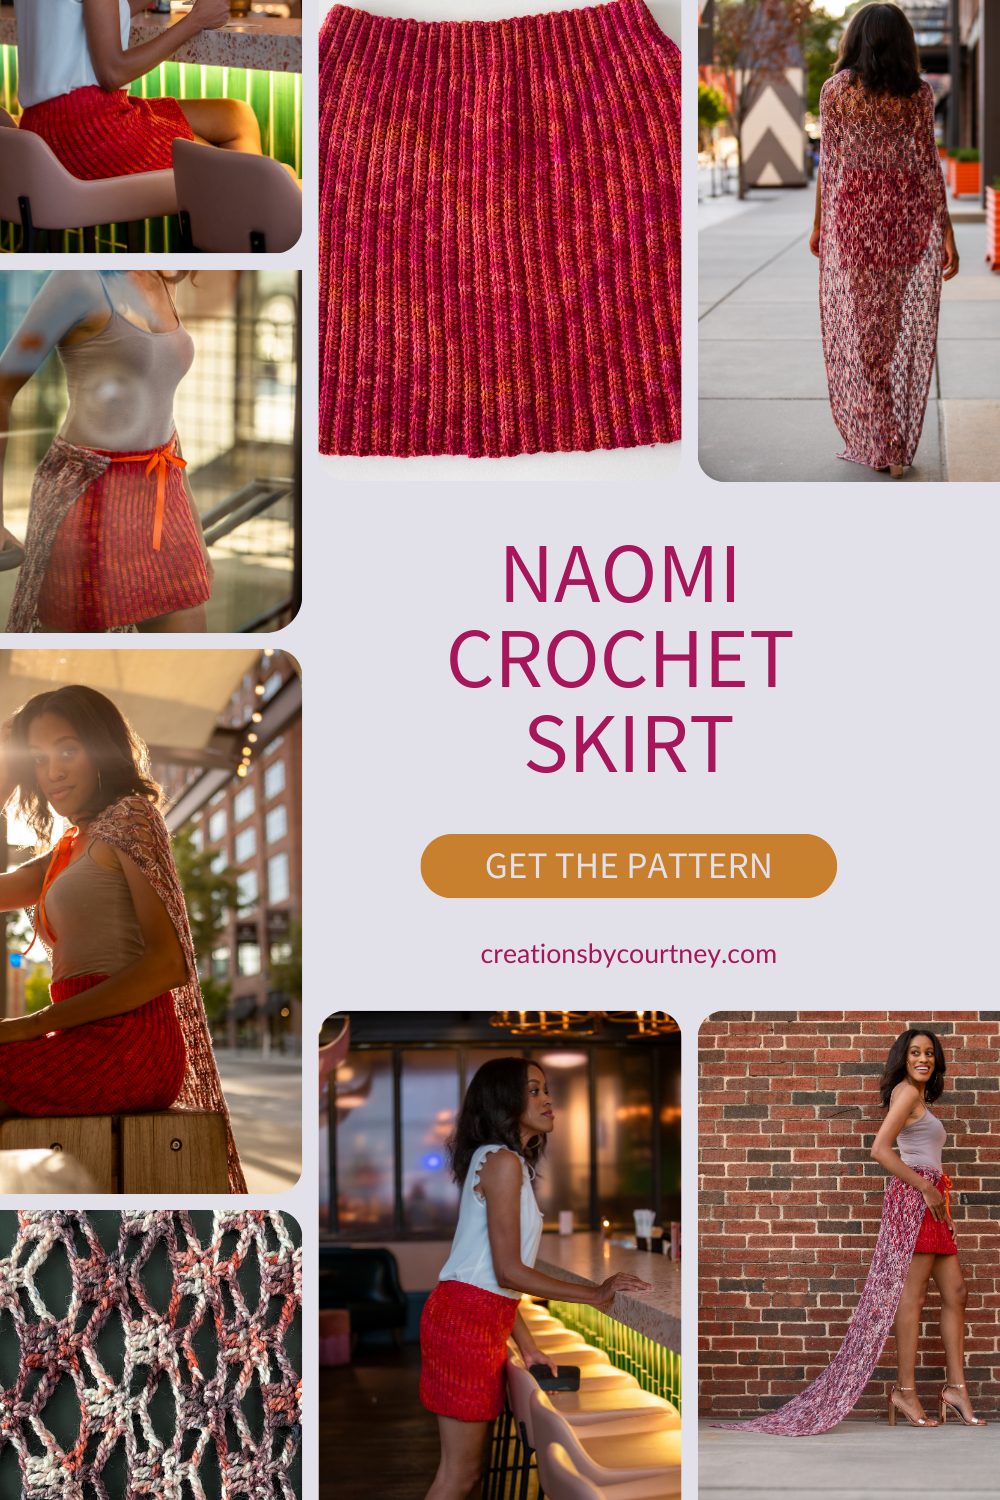 A collage of images of the Naomi Crochet Skirt being worn by an African American woman. 

From top right to left, down than bottom to the right: The woman is wearing crochet train at the shoulder and walking away; a close up of the crochet skirt; the woman sitting at a bar in the crochet skirt and a blouse; the woman walking up stairs in the crochet skirt and train with a tank; the woman sitting with the sun shining behind her wearing the skirt and train as a cape; a close up of the crochet lace stitch of the train; the woman ordering at a bar; the woman standing in front of a brick wall in the crochet skirt and the train is stretched behind her.